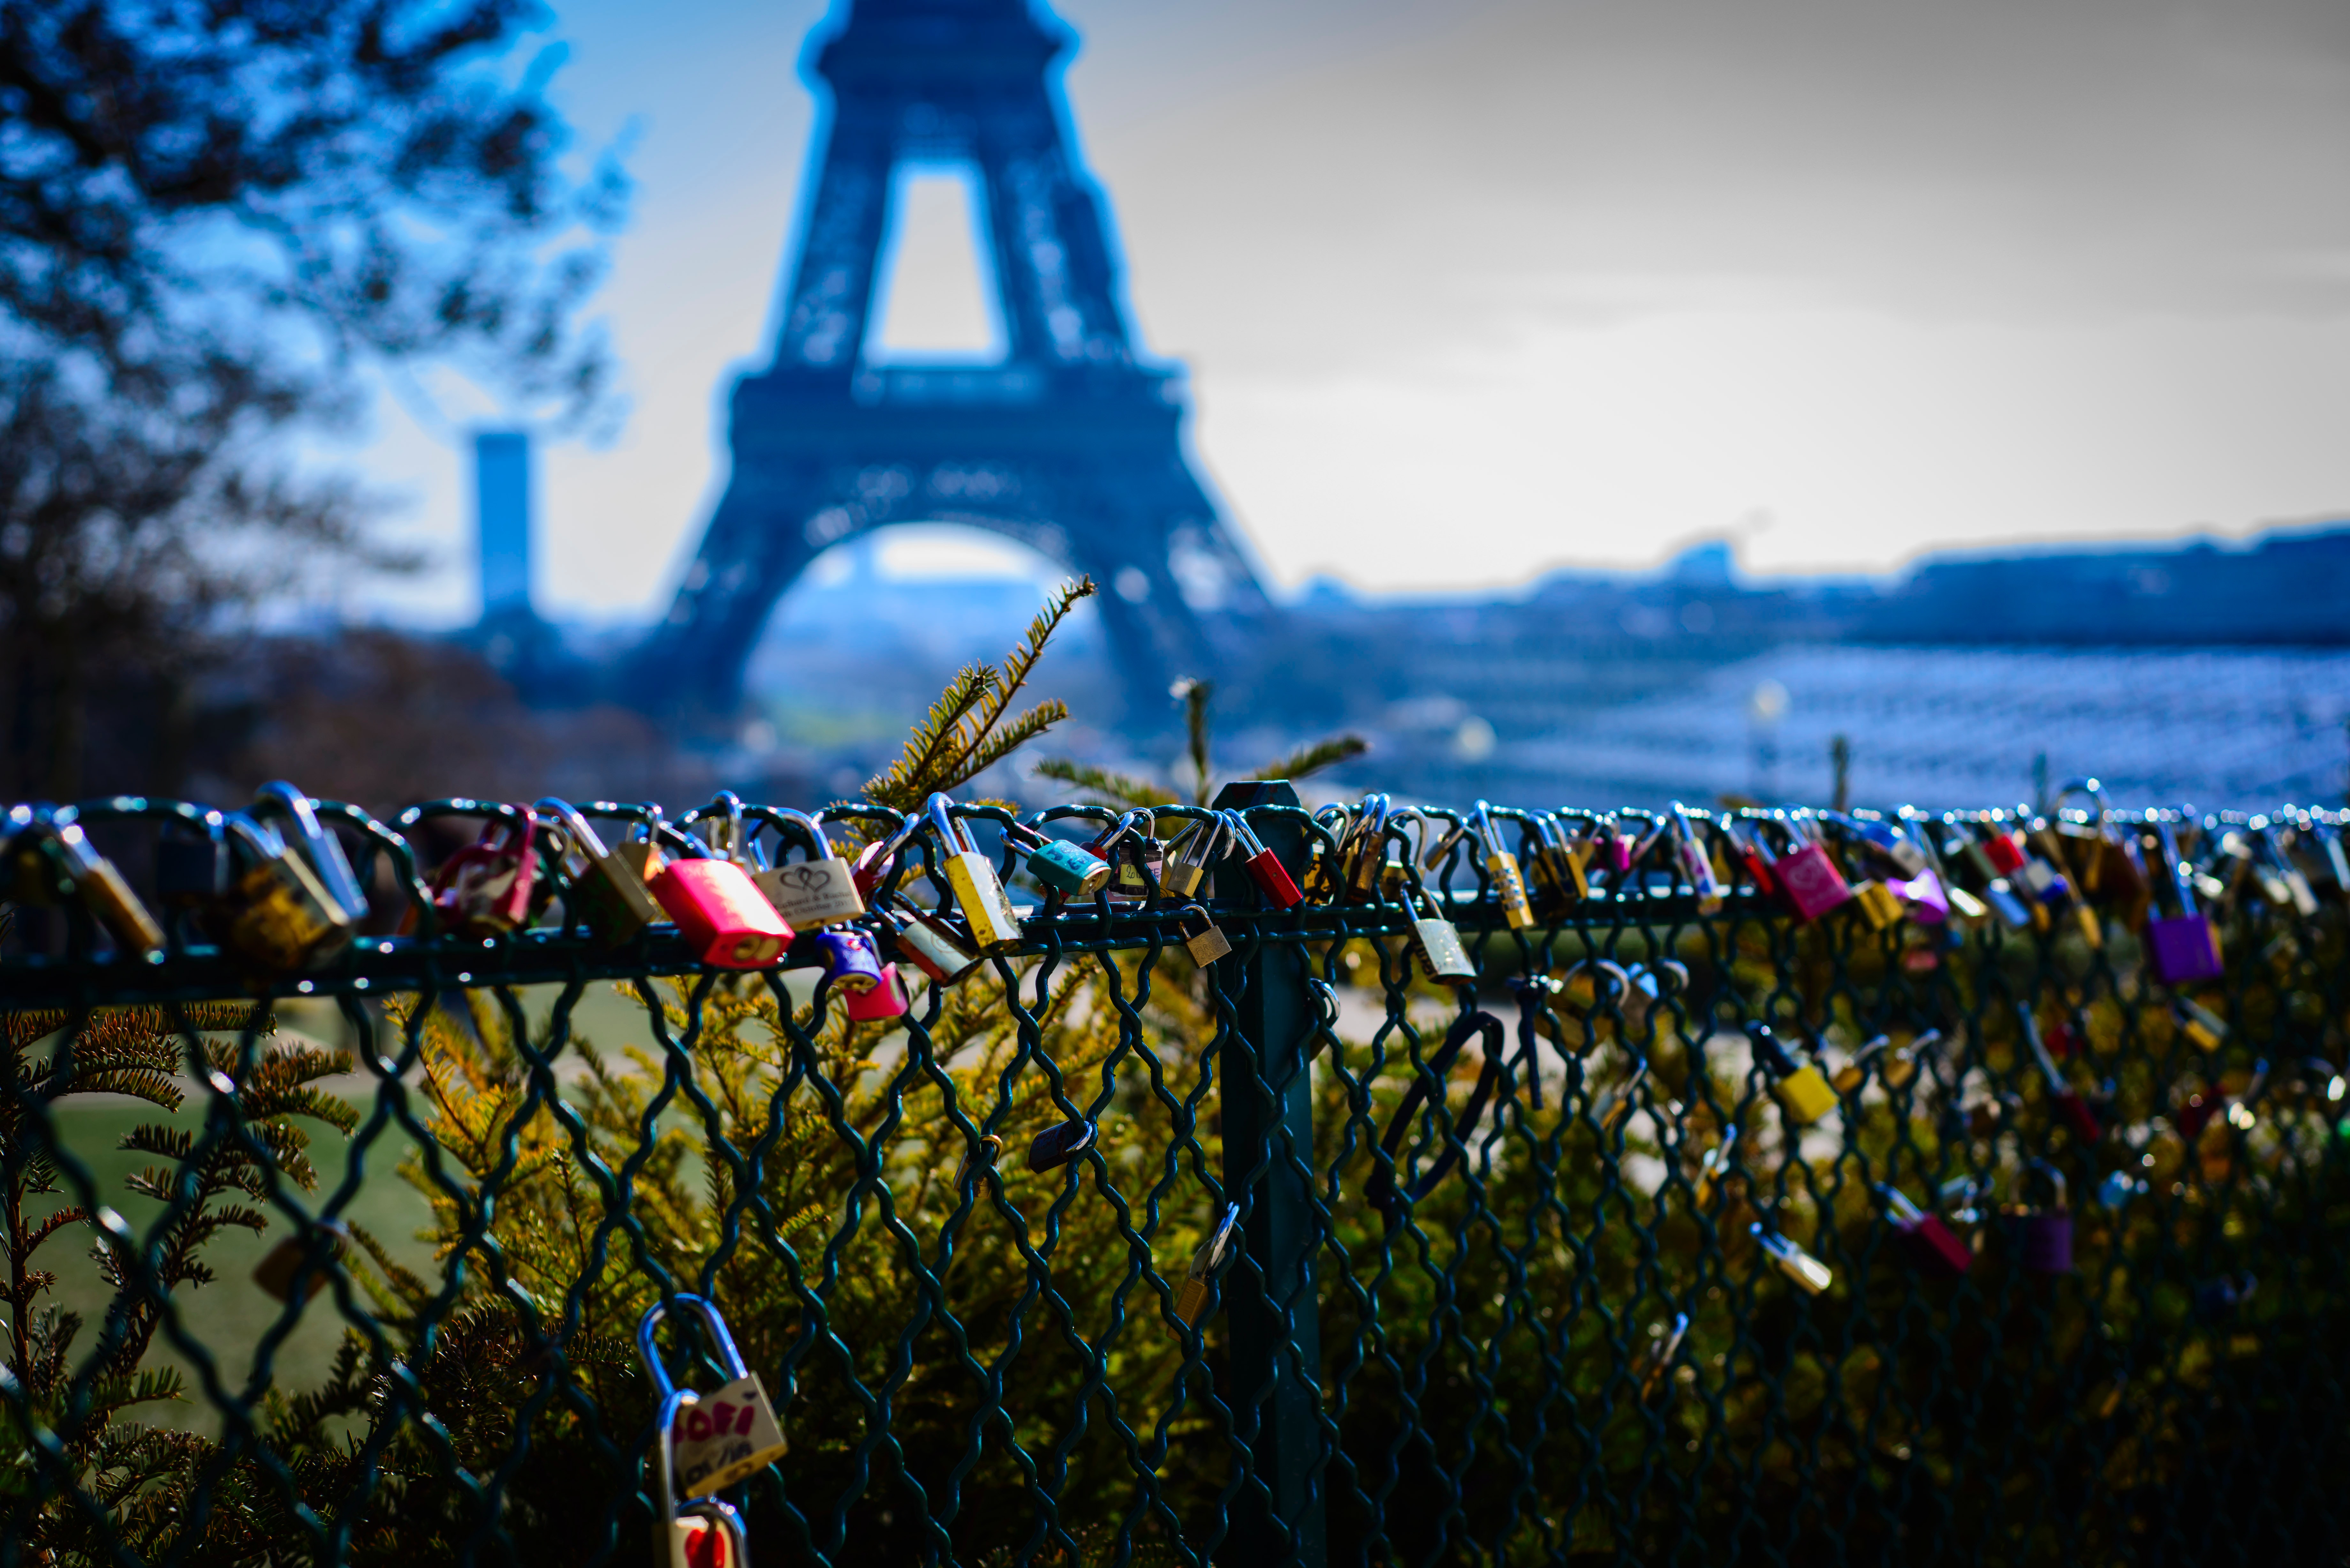 Assorted-color Padlocks Near Eiffel Tower in Paris France, Blurred background, City, Clouds, Colors, HQ Photo